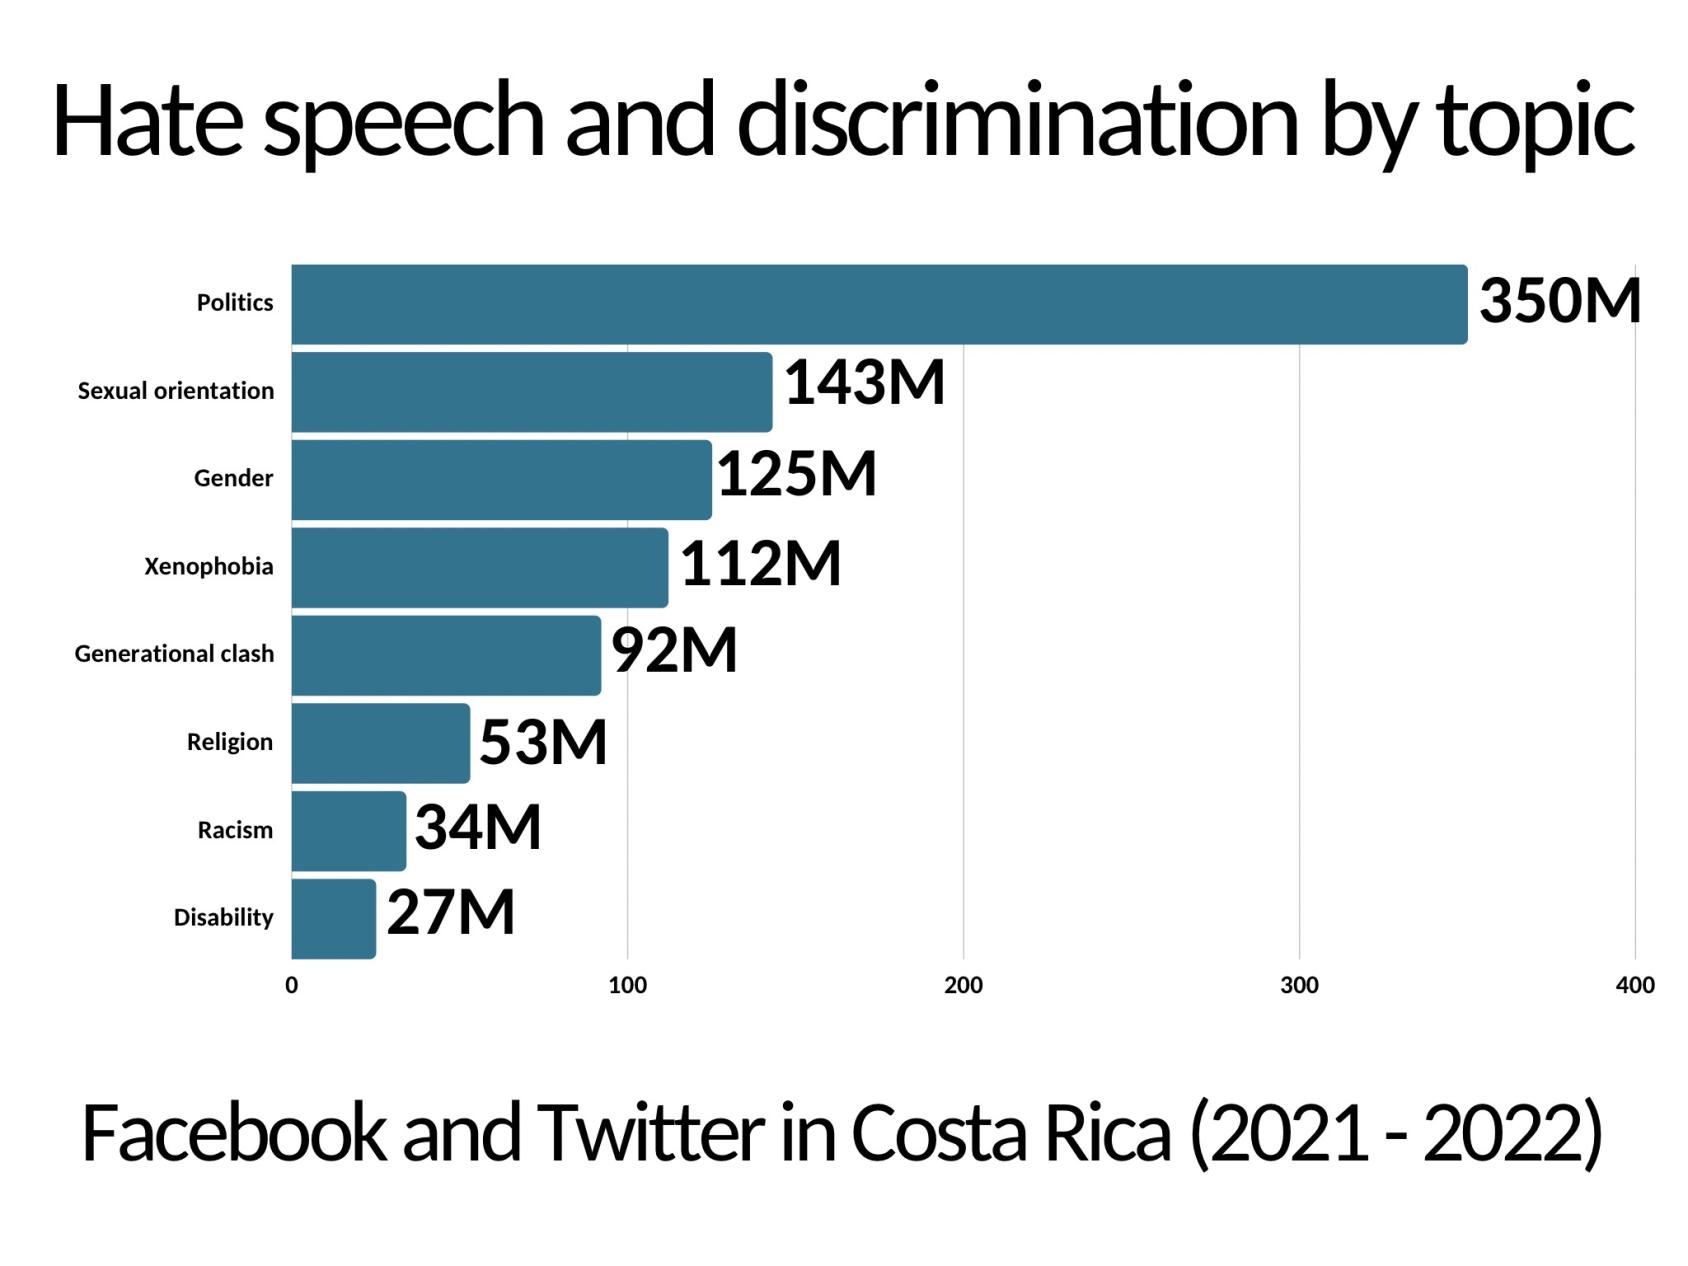 Figures on hate speech and discrimination by topic.